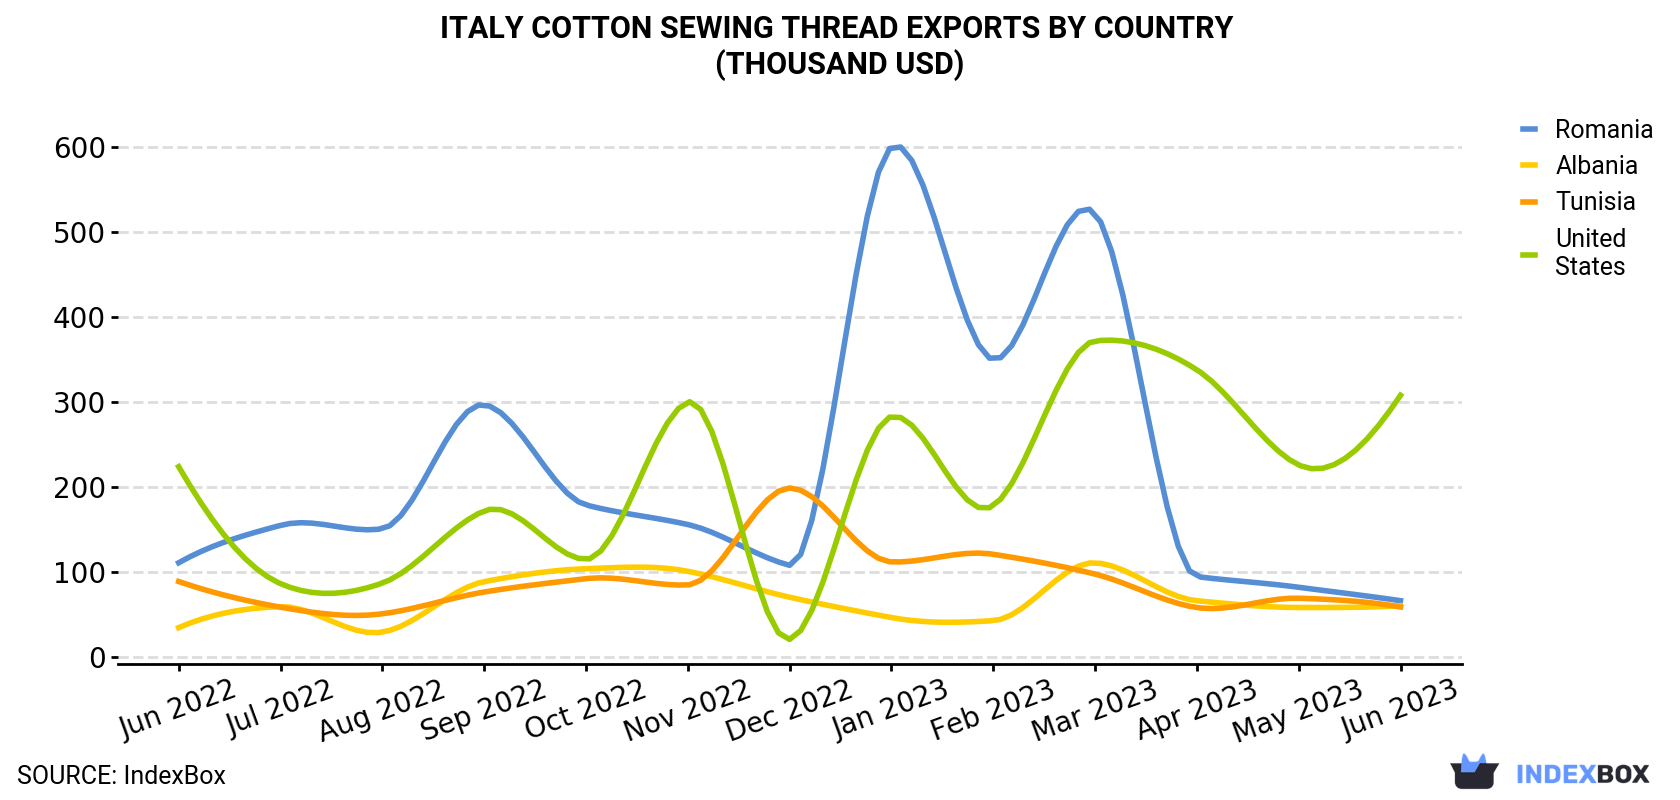 Italy Cotton Sewing Thread Exports By Country (Thousand USD)